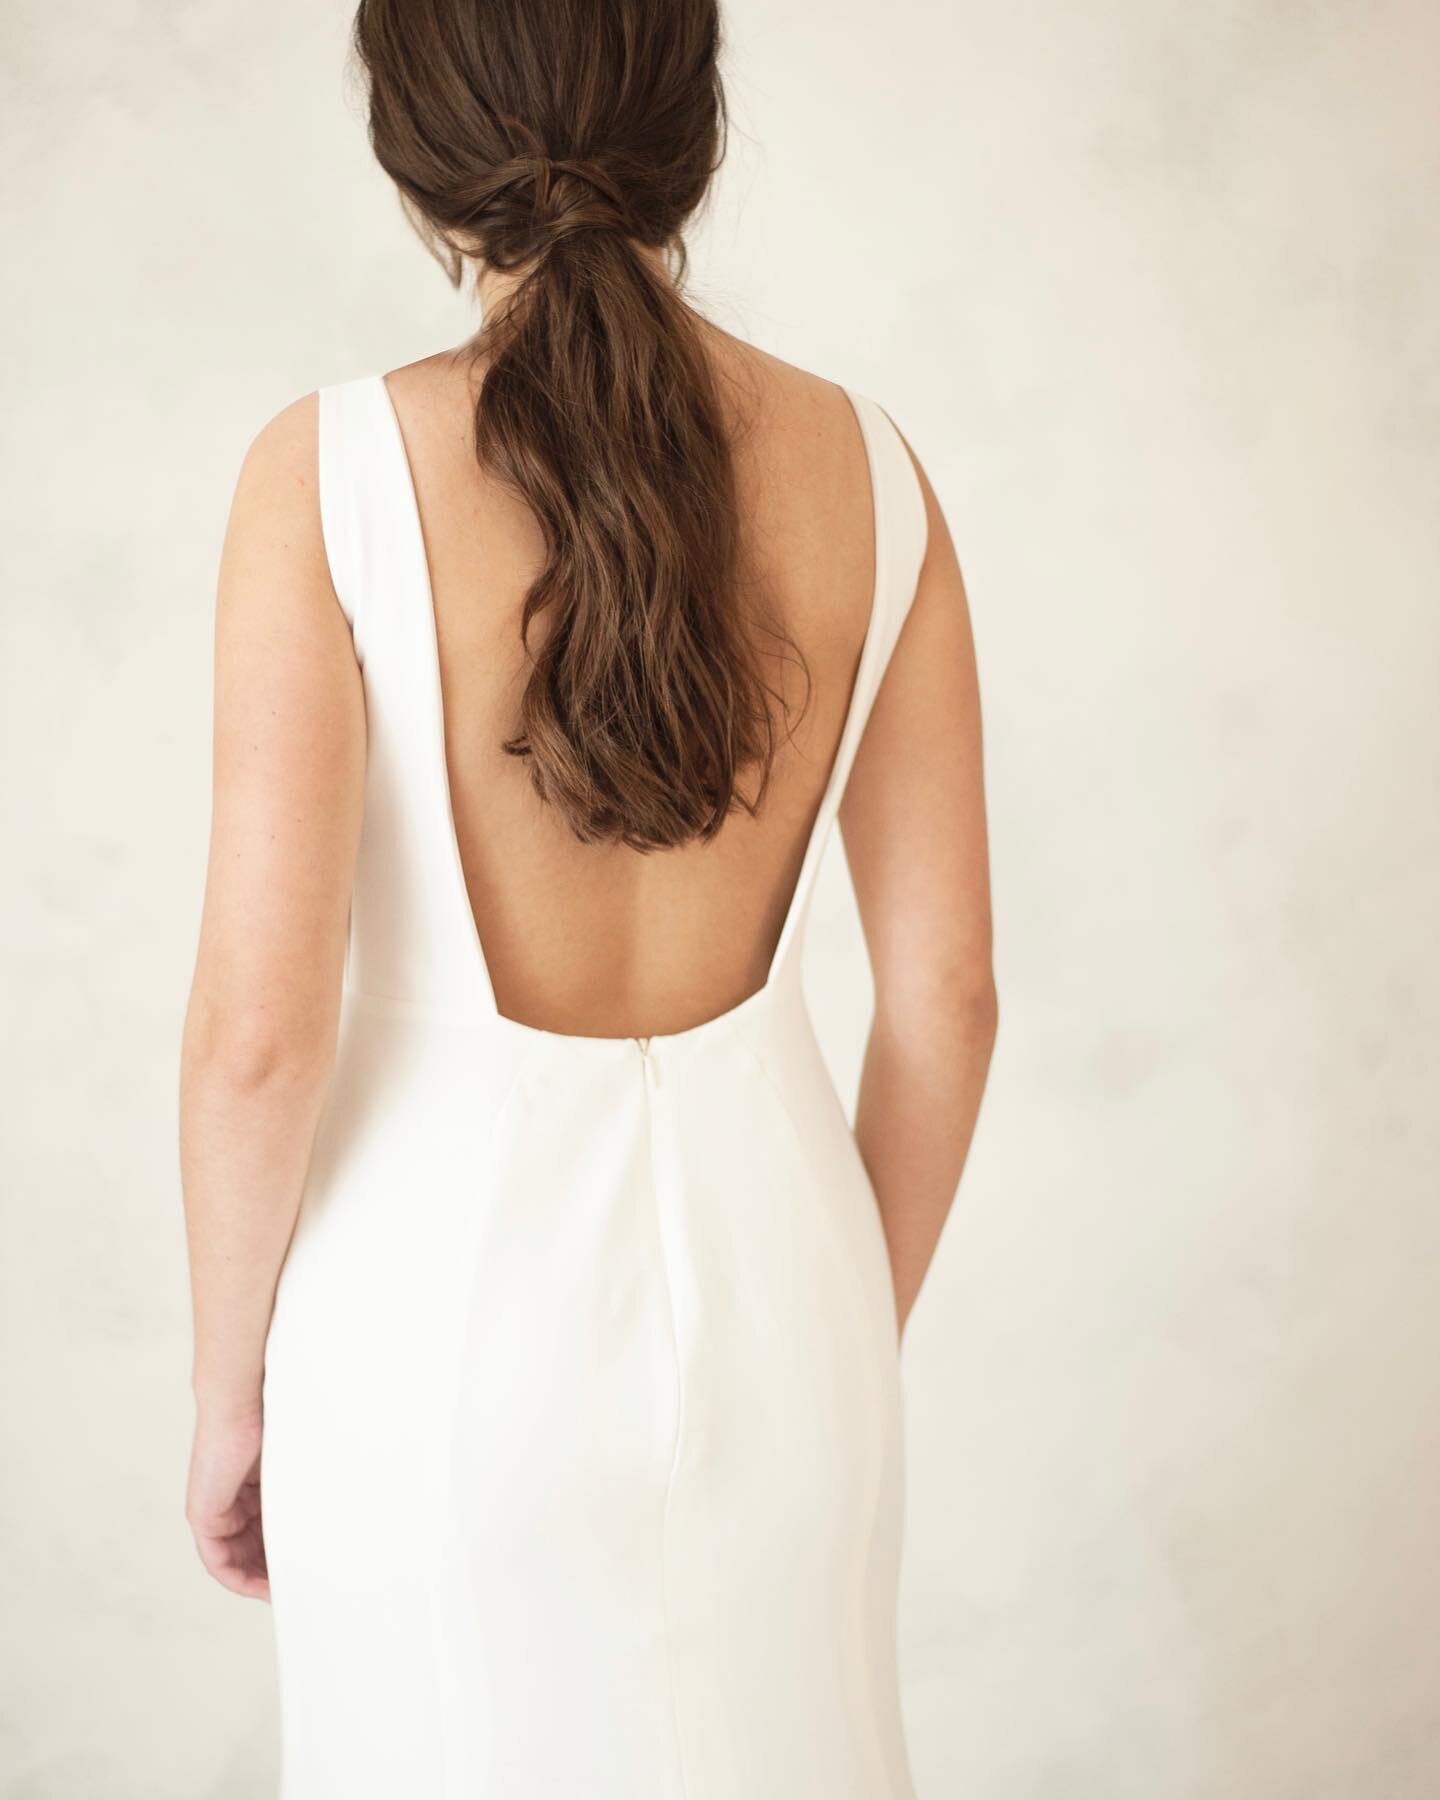 Meet Clara, a sleek open back fit and flare crepe gown with optional removable sleeves | Clara is coming to our upcoming trunk show October 28th to 30th at Yours, by E! 

Clara will be joined with other new gowns being unveiled that weekend! @halifax